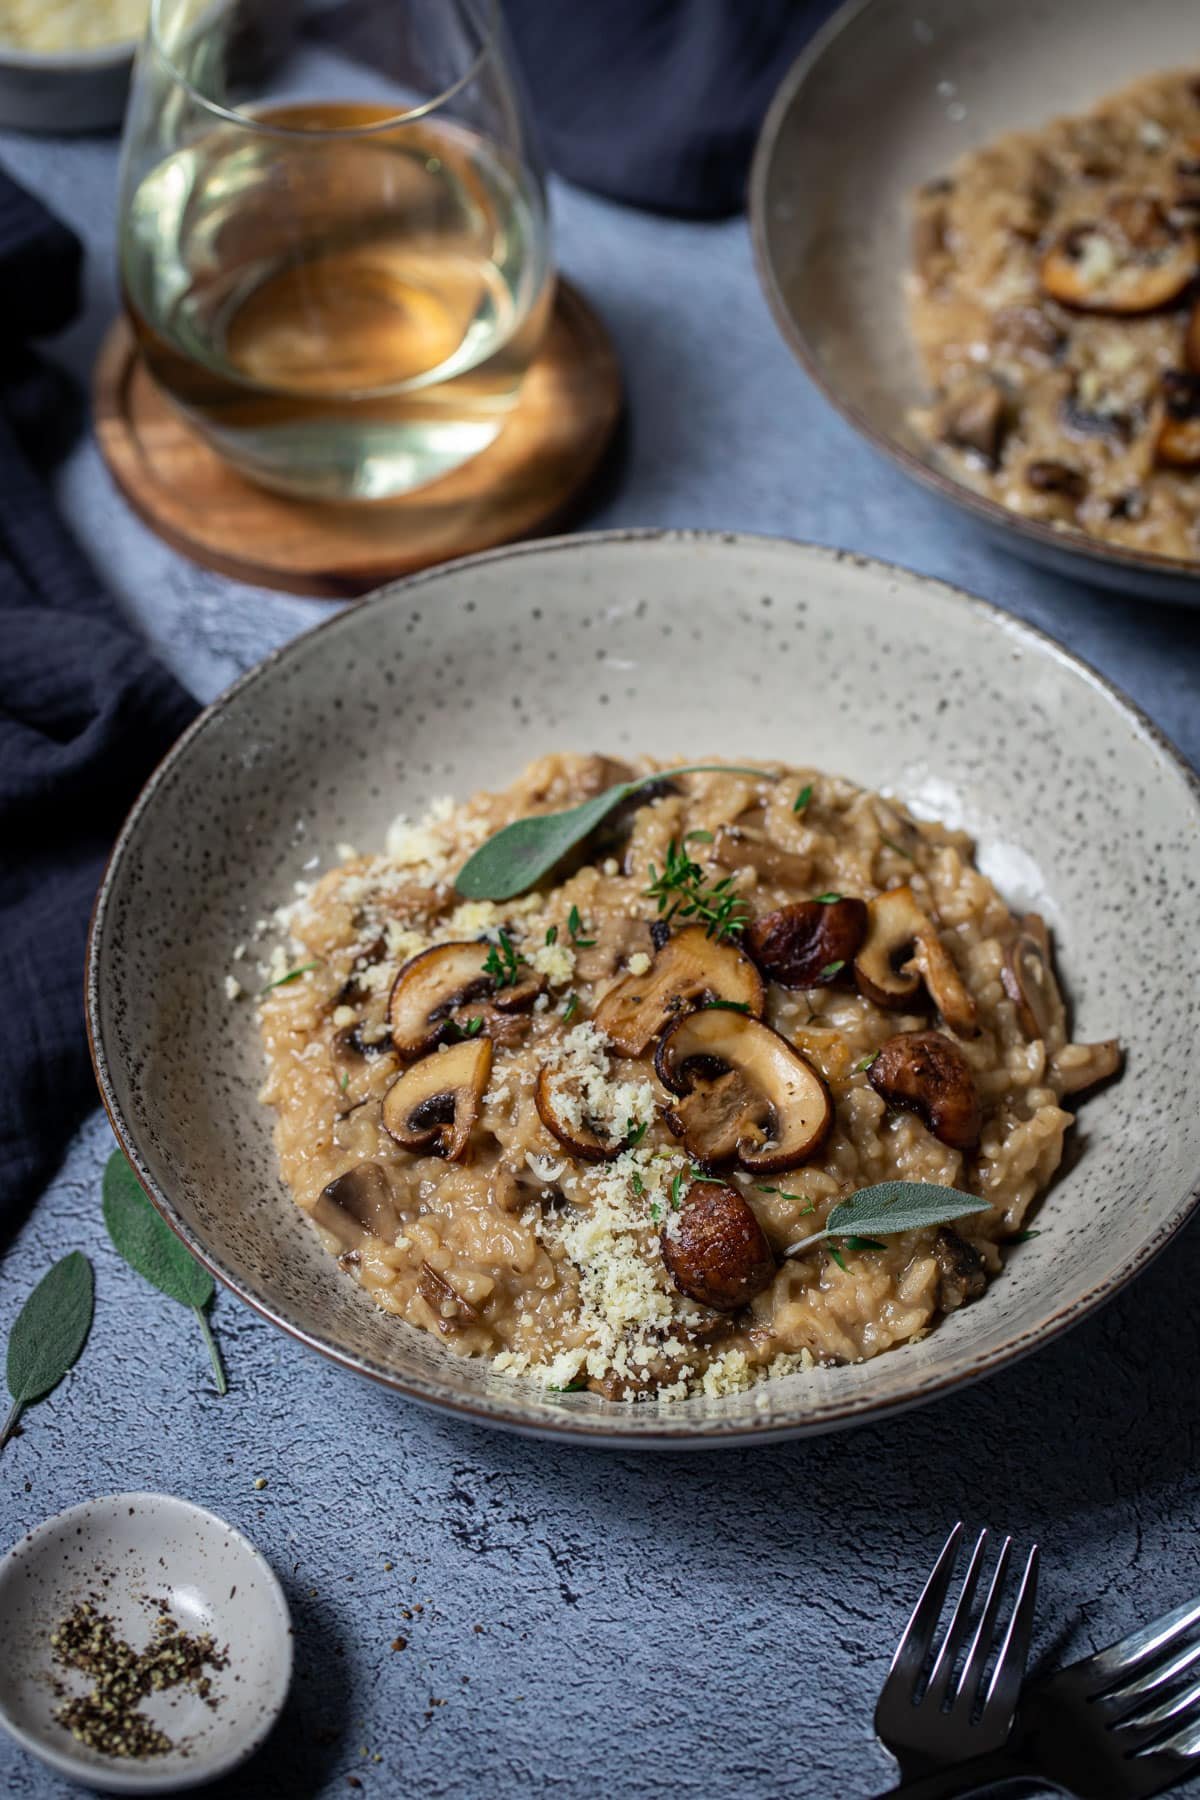 a bowl of risotto on a table, topped with sliced mushrooms and herbs.